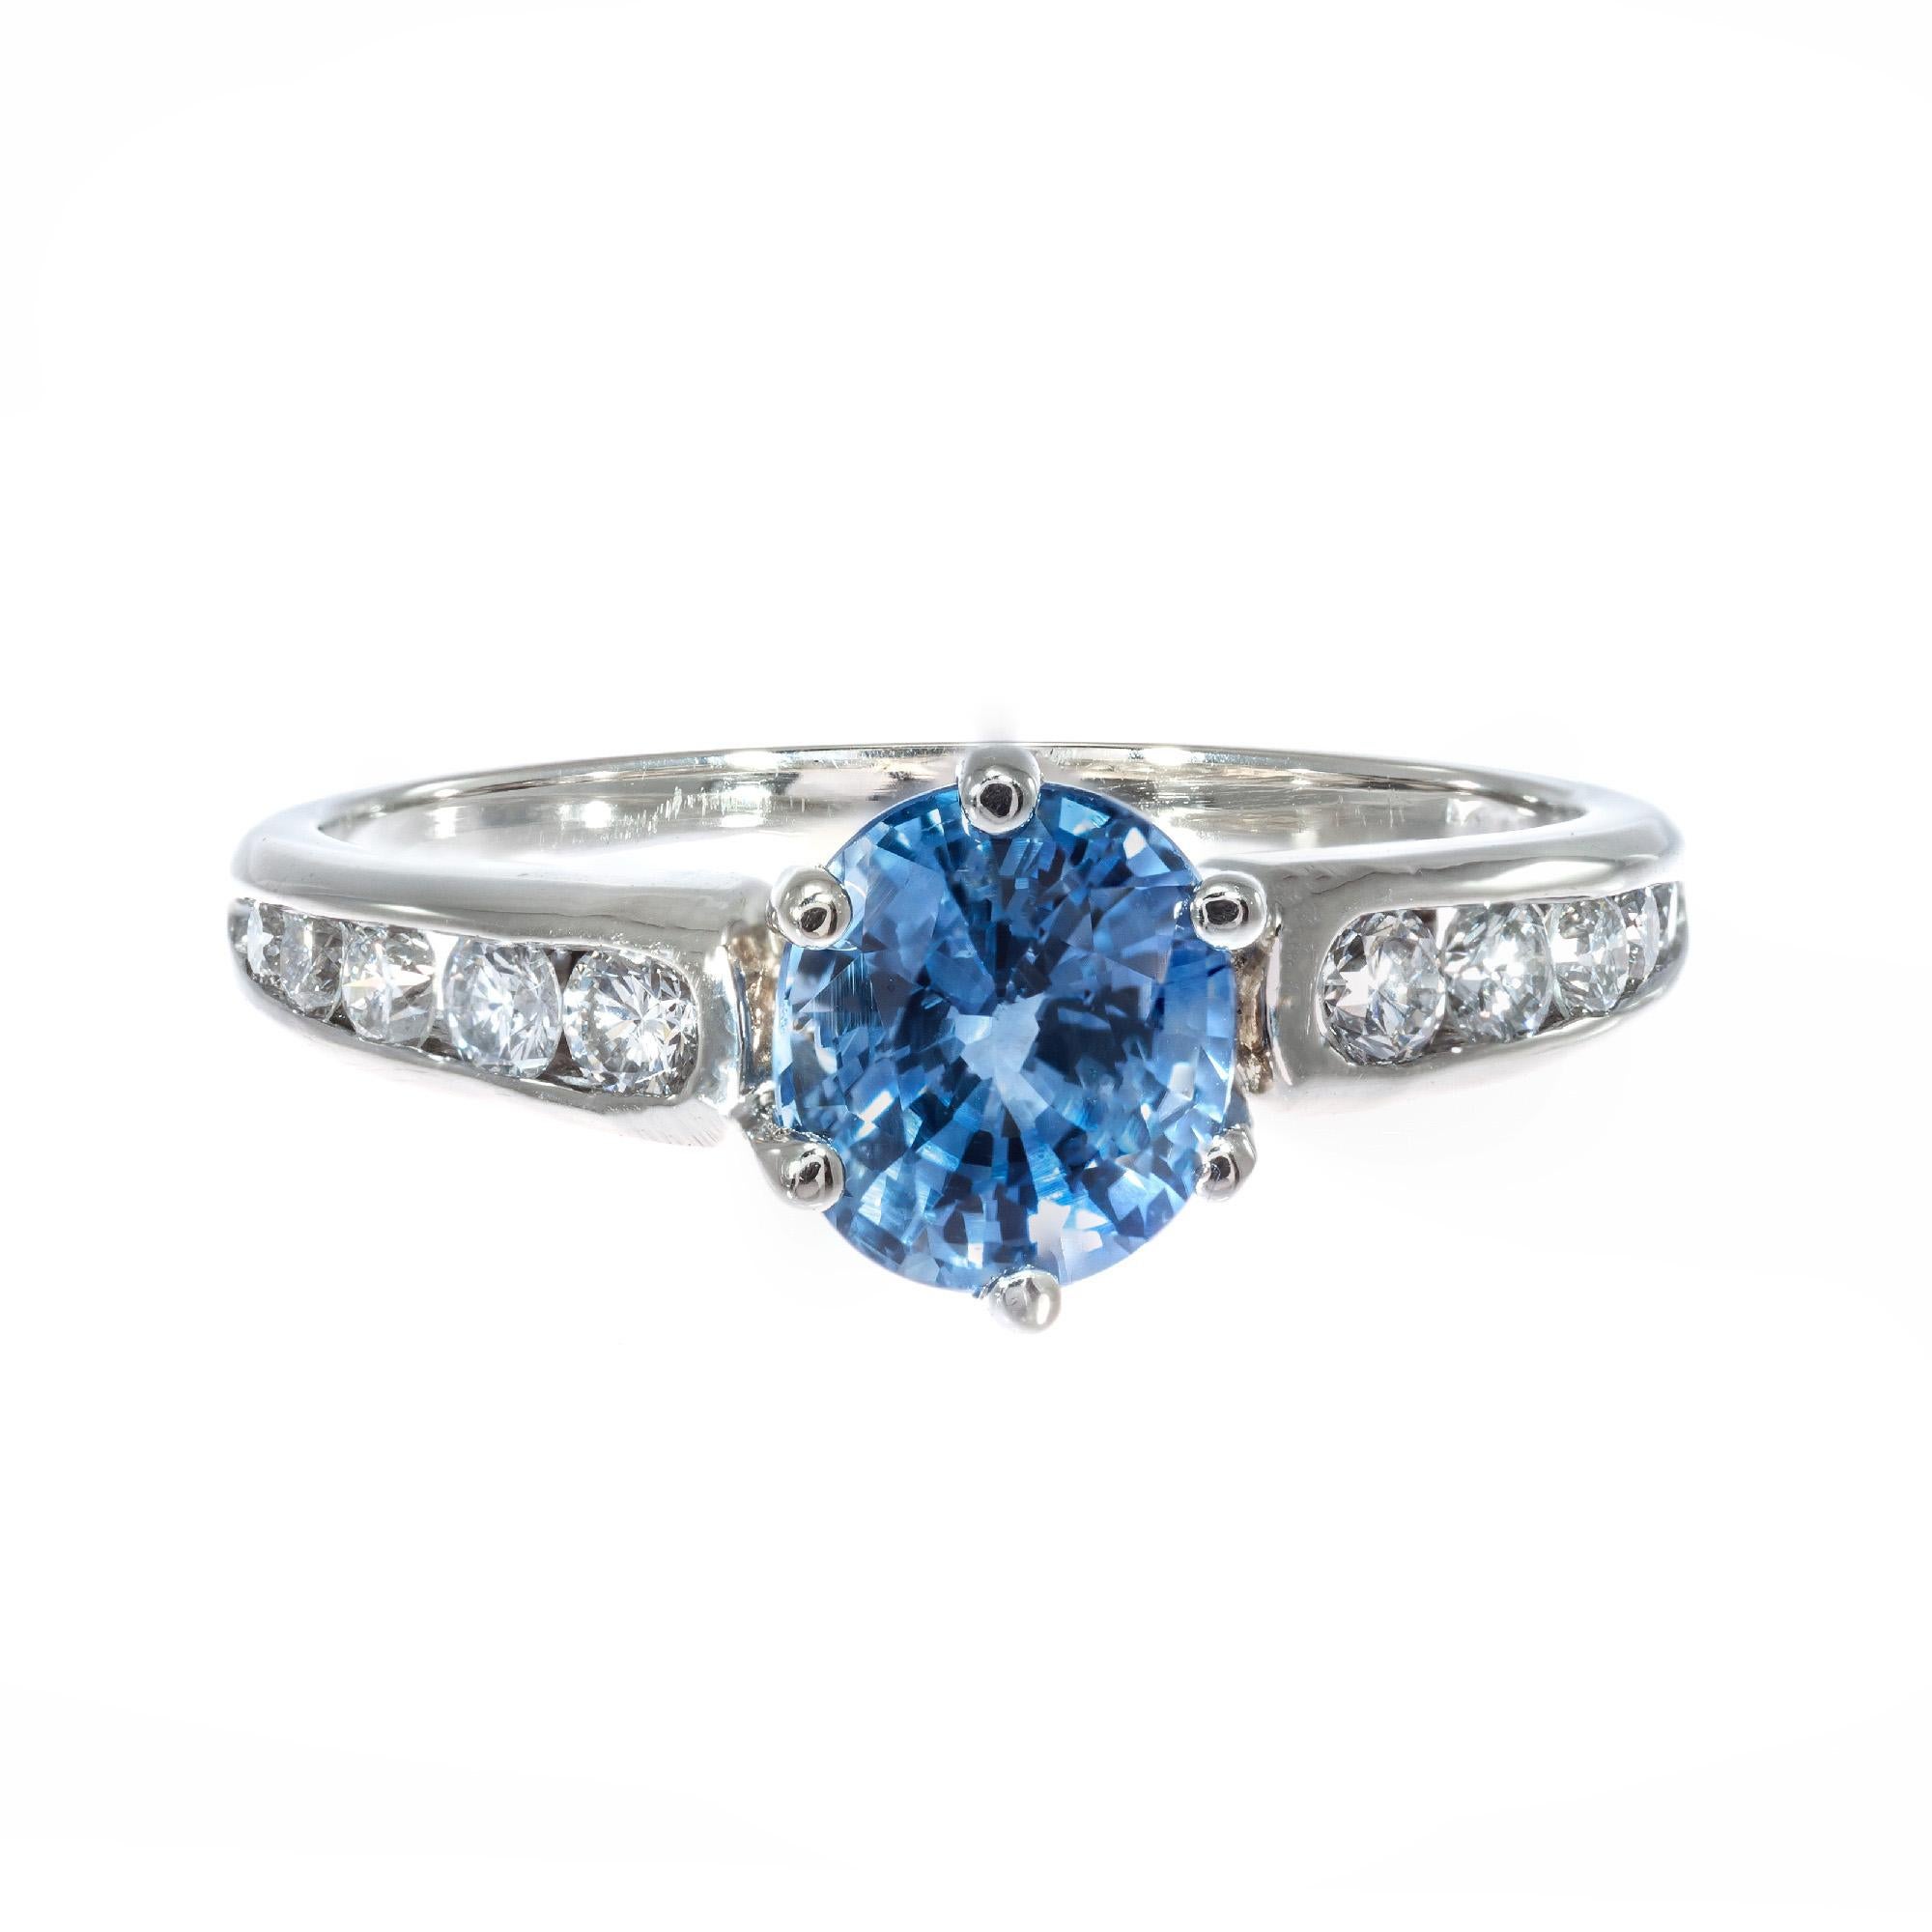 1960's Periwinkle blue sapphire and diamond engagement ring.  AGL certified as simple heat only, no other enhancements. 14k white gold setting with 10 round accent diamonds. 

1 oval mixed cut SI blue sapphire, Approximate 1.54ct AGL Certificate #